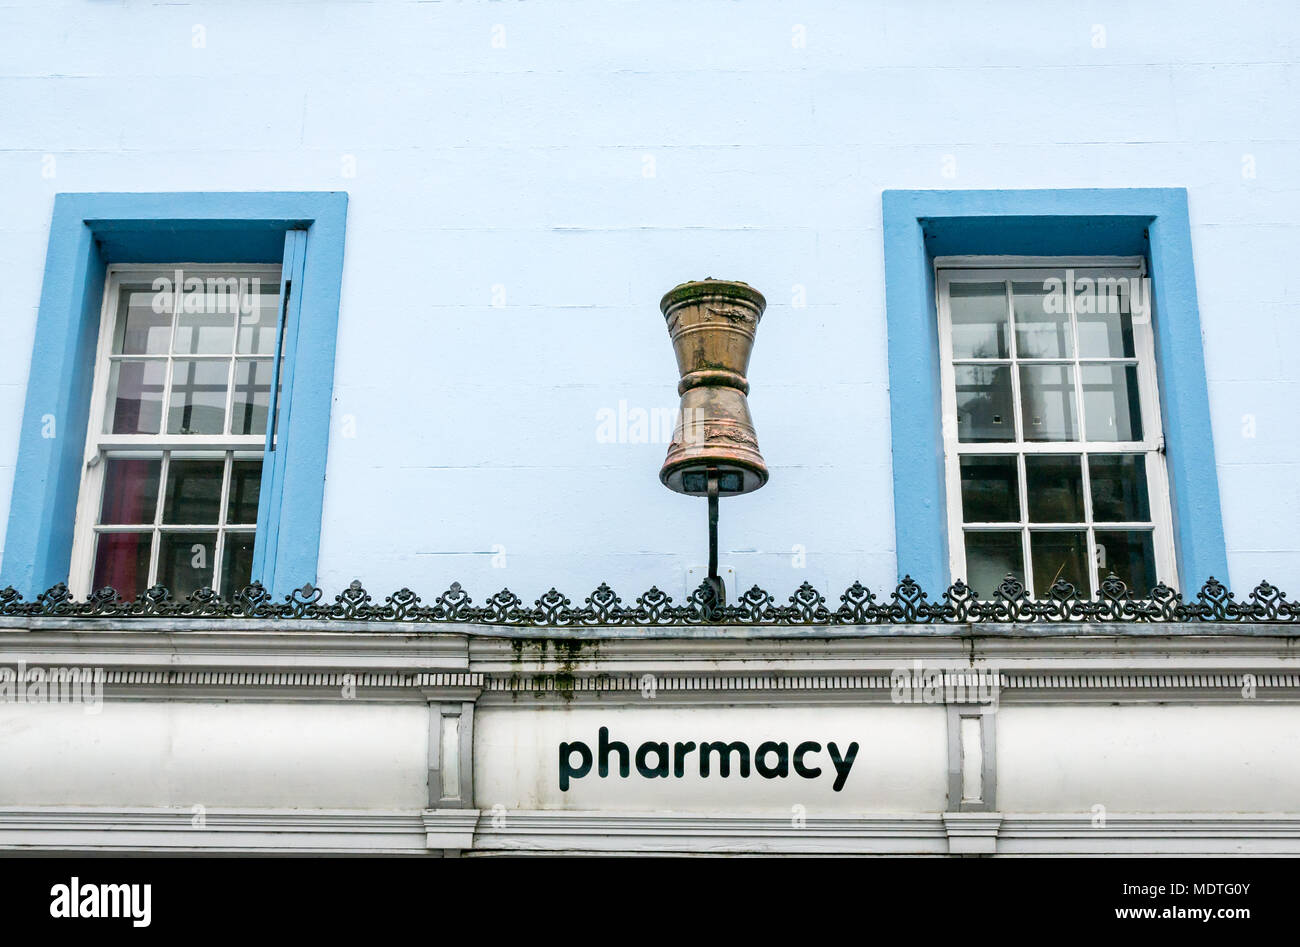 Old fashioned apothecary sign of gold mortar above pharmacy shop doorway against a blue wall and windows, High Street Haddington, Scotland, UK Stock Photo